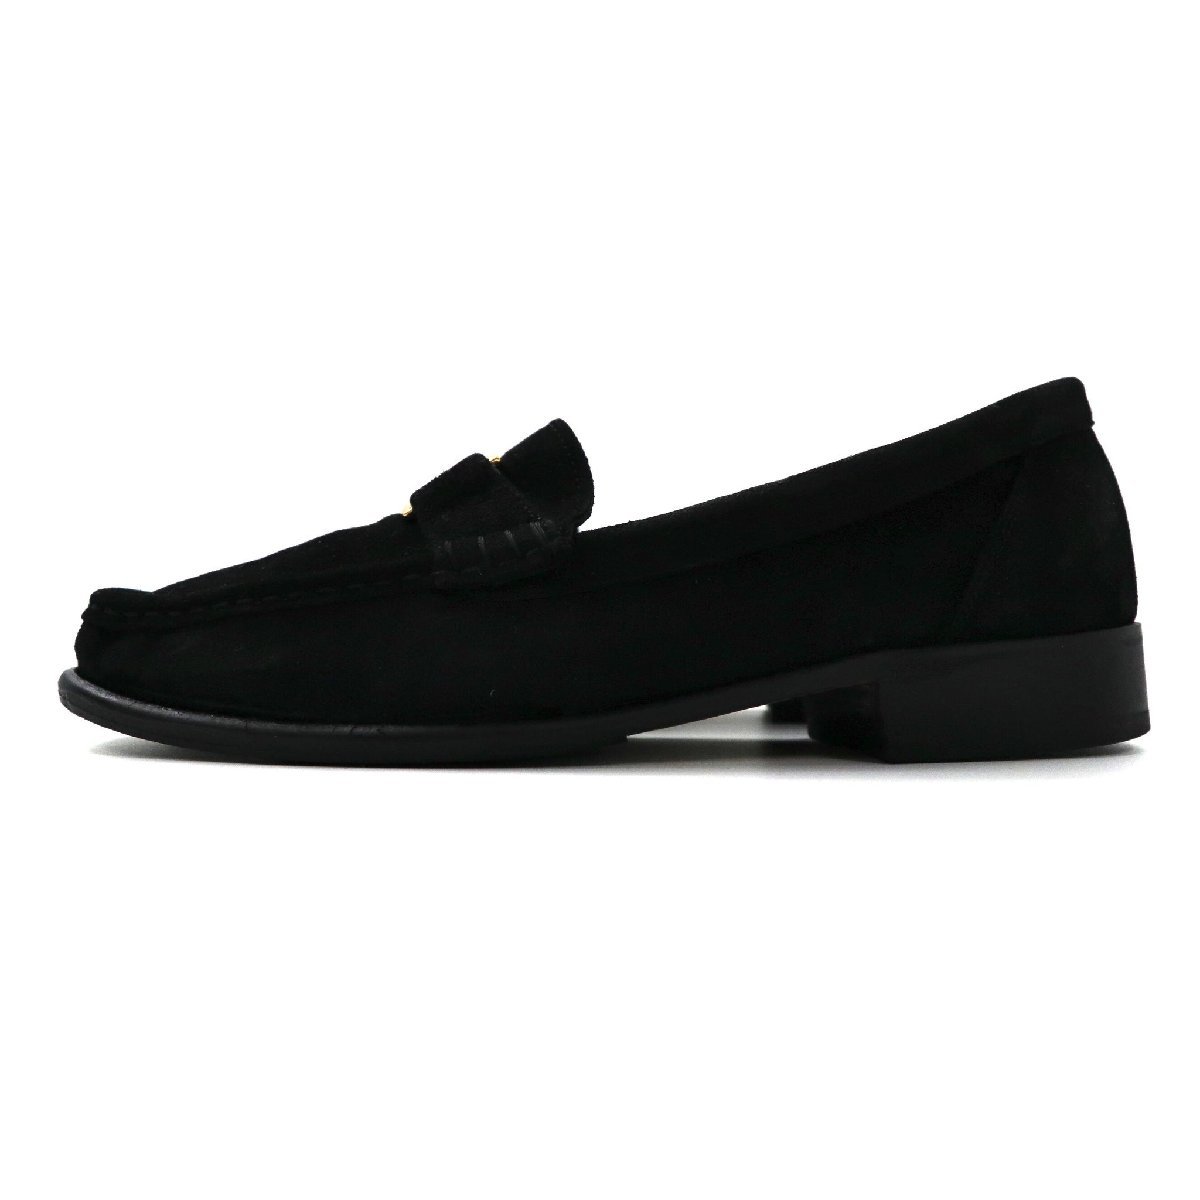 BALLY Loafer 24CM black suede leather Italy made 